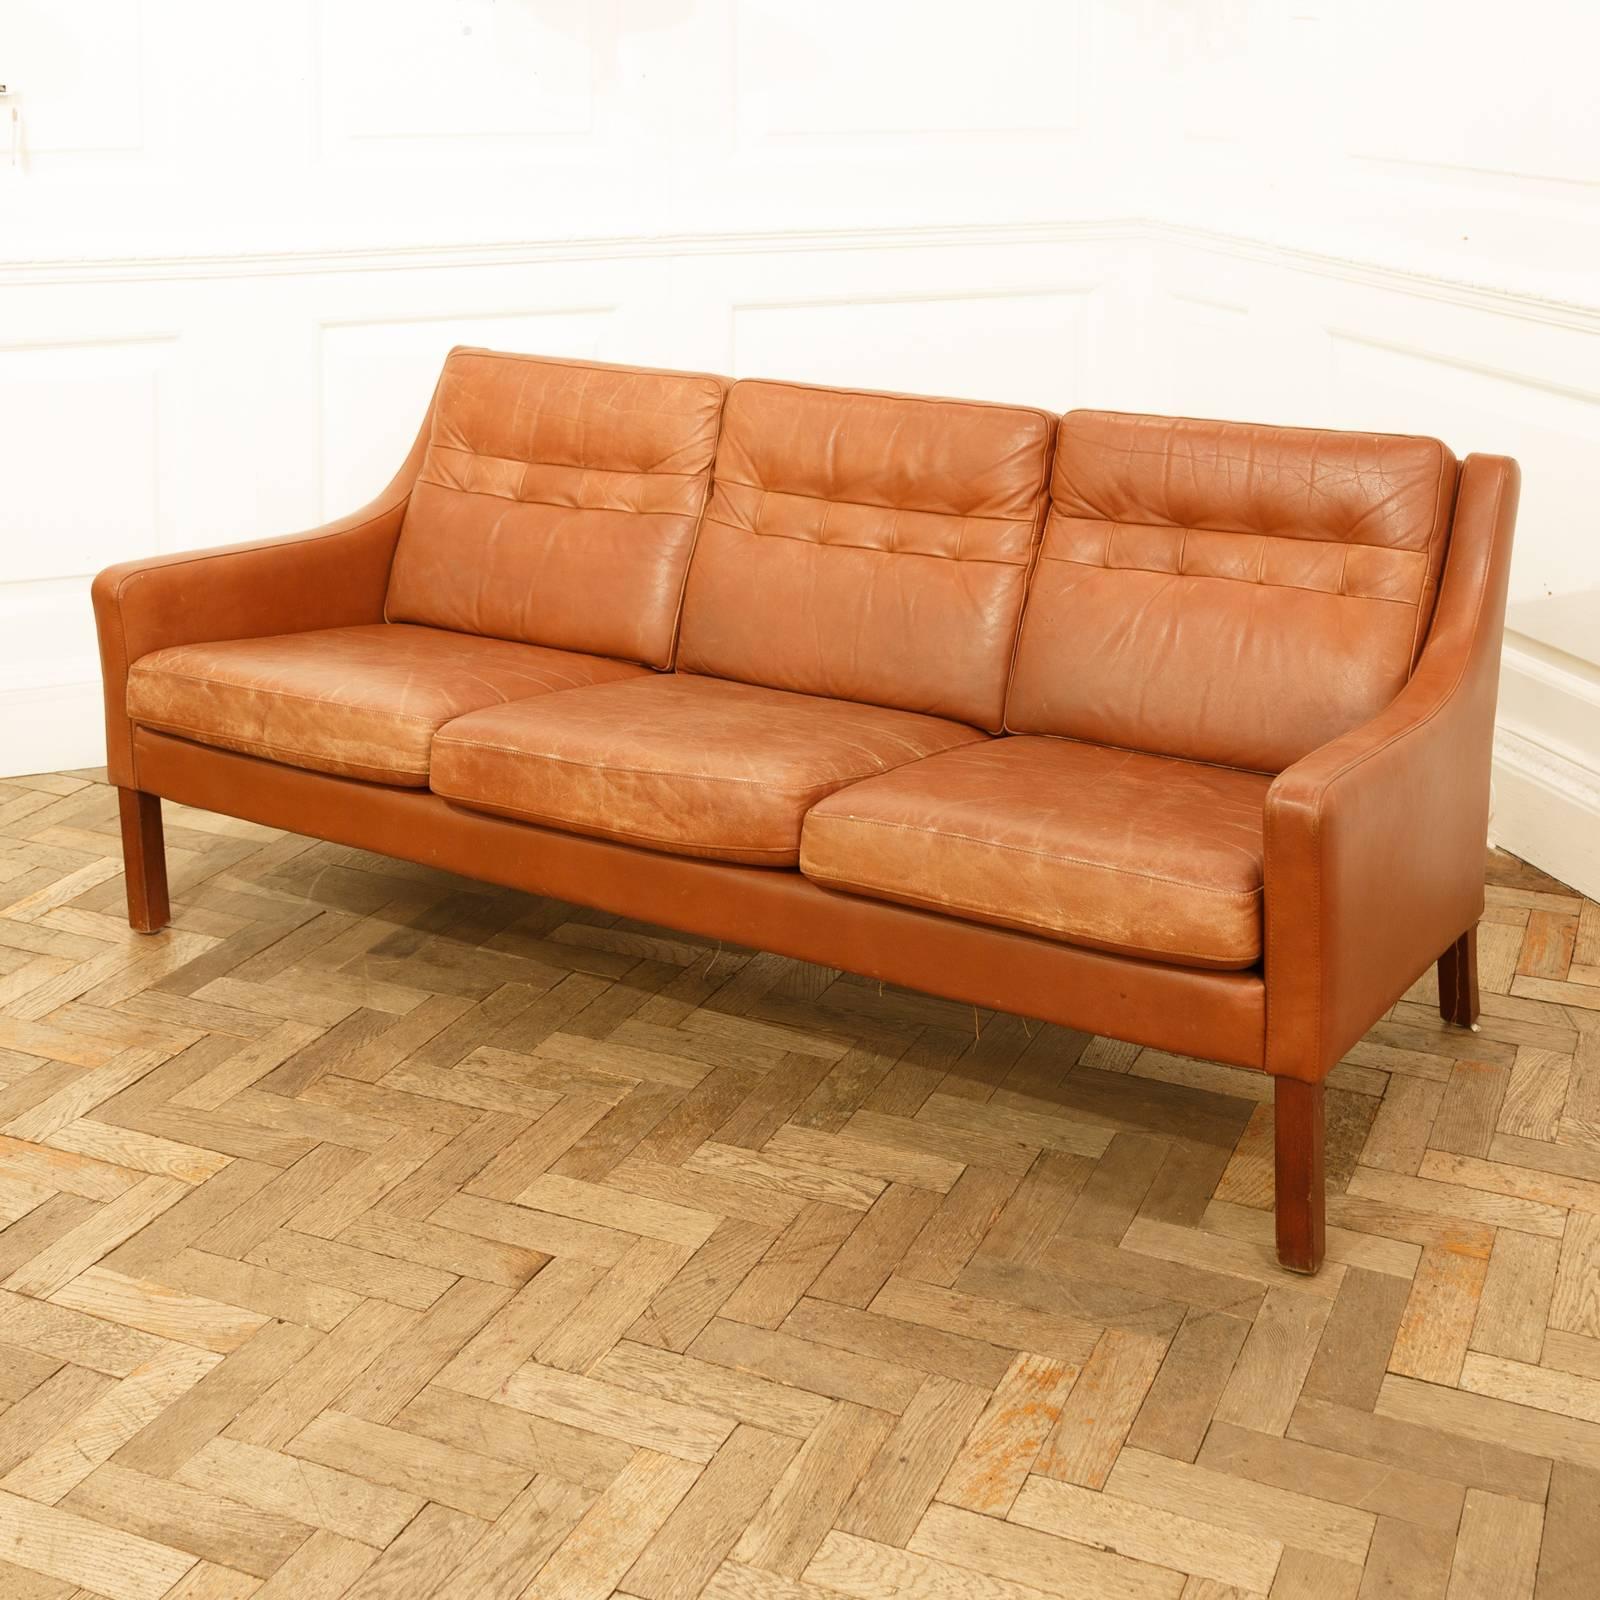 A large three-seat sofa in the style of Børge Mogensen.